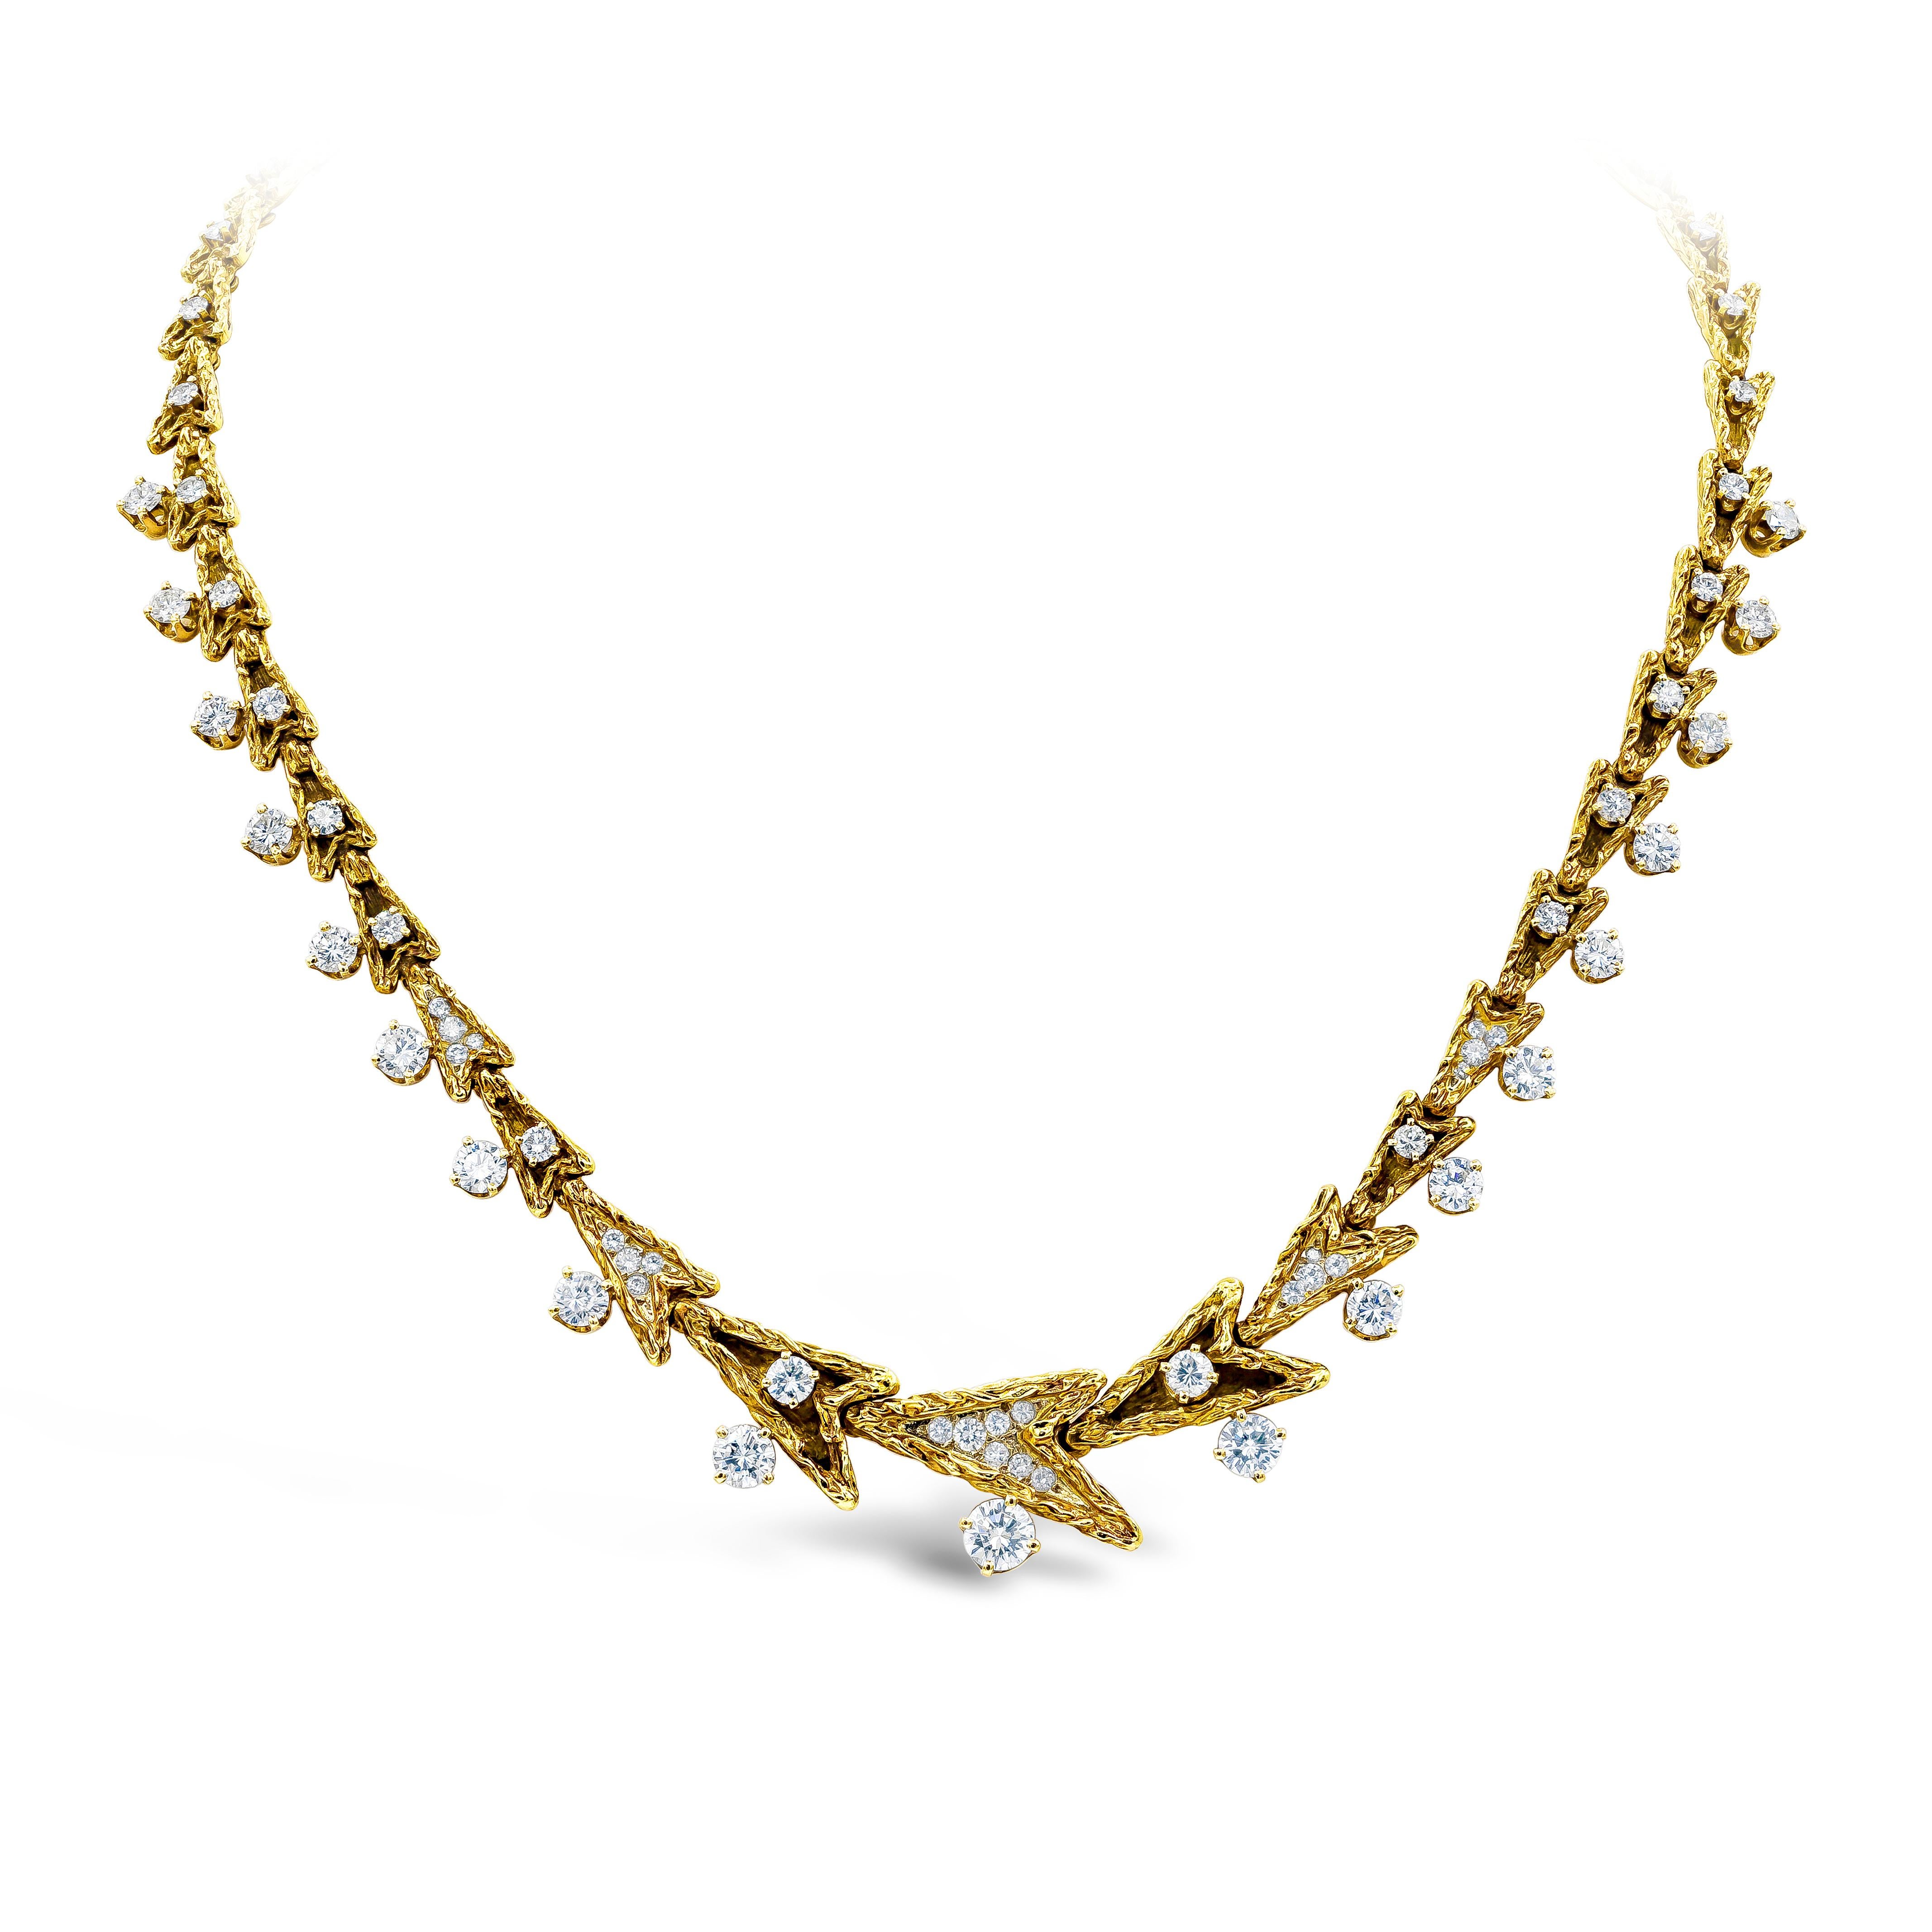 A antique and intricately-designed necklace showcasing a line of arrowhead shapes accented by round brilliant diamonds weighing 7.25 carats total. Diamonds are approximately G color and VS in clarity. Finished with hand-engraved etches. Finely made